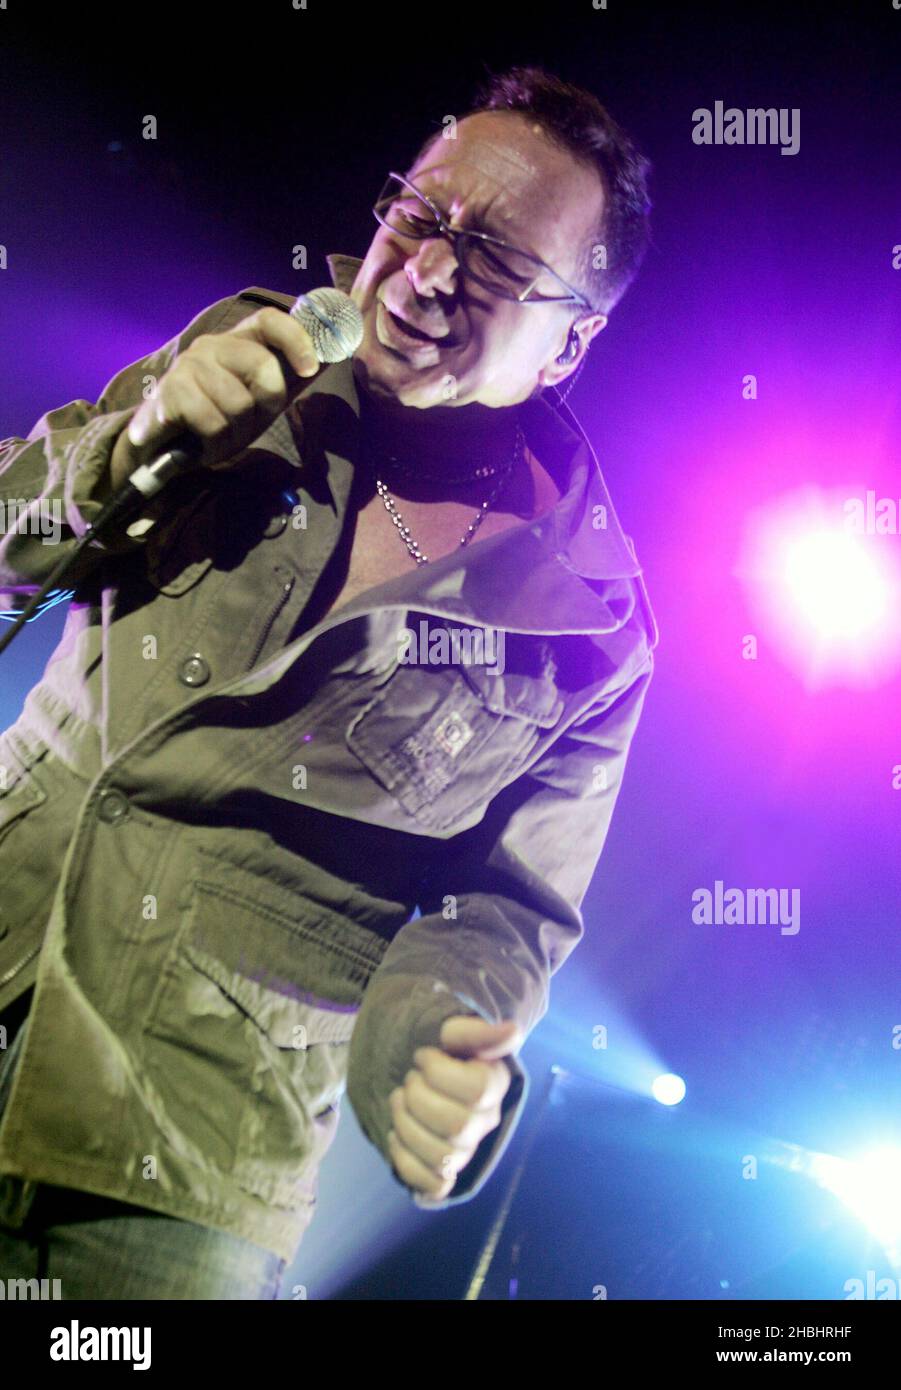 Jim Kerr of Scottish pop-rock group Simple Minds perform live on stage their latest album "Black & White 050505" at The Astoria on February 13, 2006 in London. Stock Photo